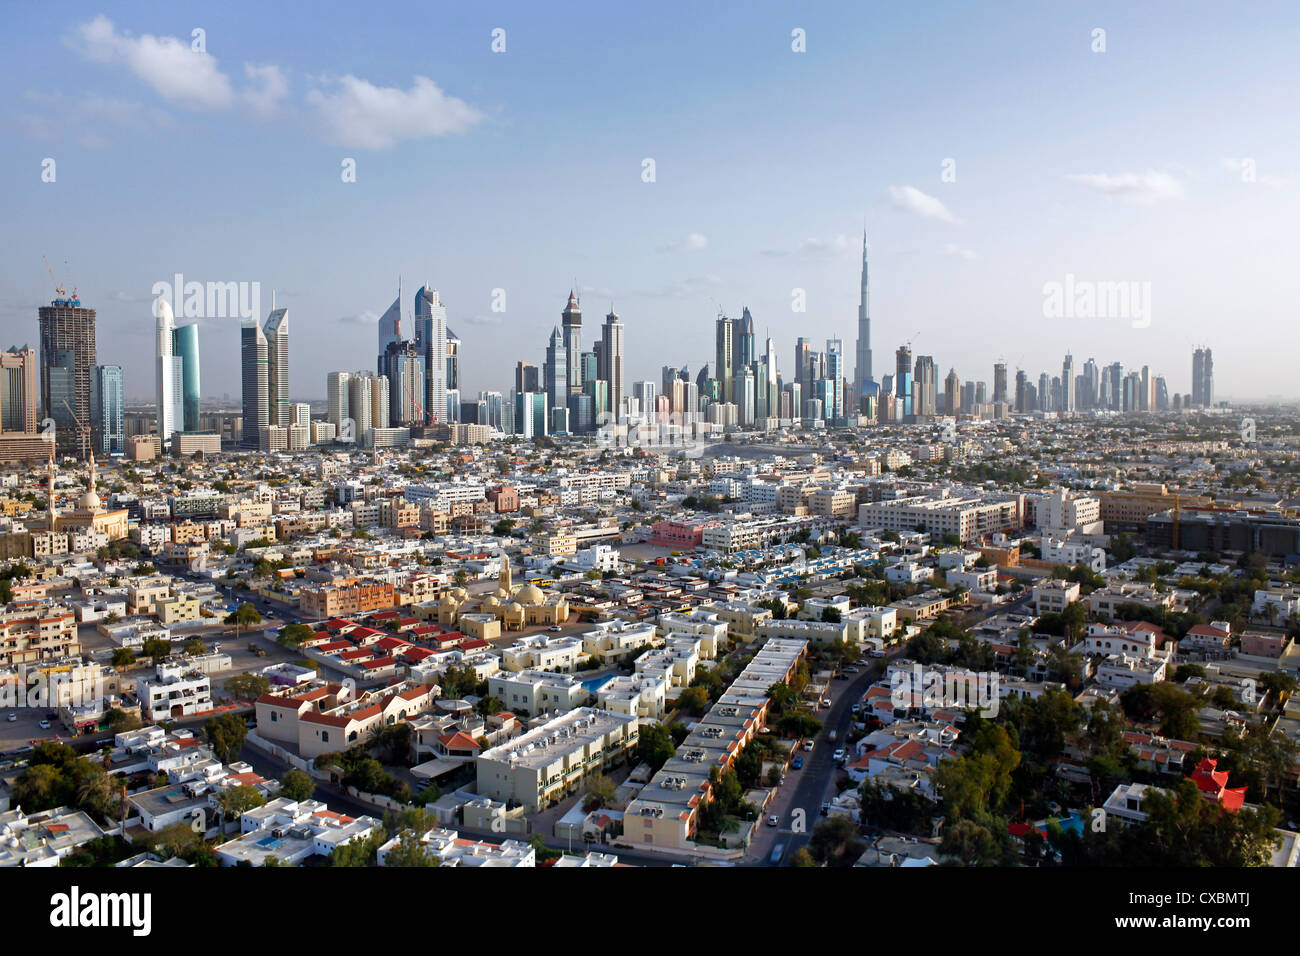 View of the new Dubai skyline of modern architecture and skyscrapers including the Burj Khalifa on Sheikh Zayed Road, Dubai Stock Photo